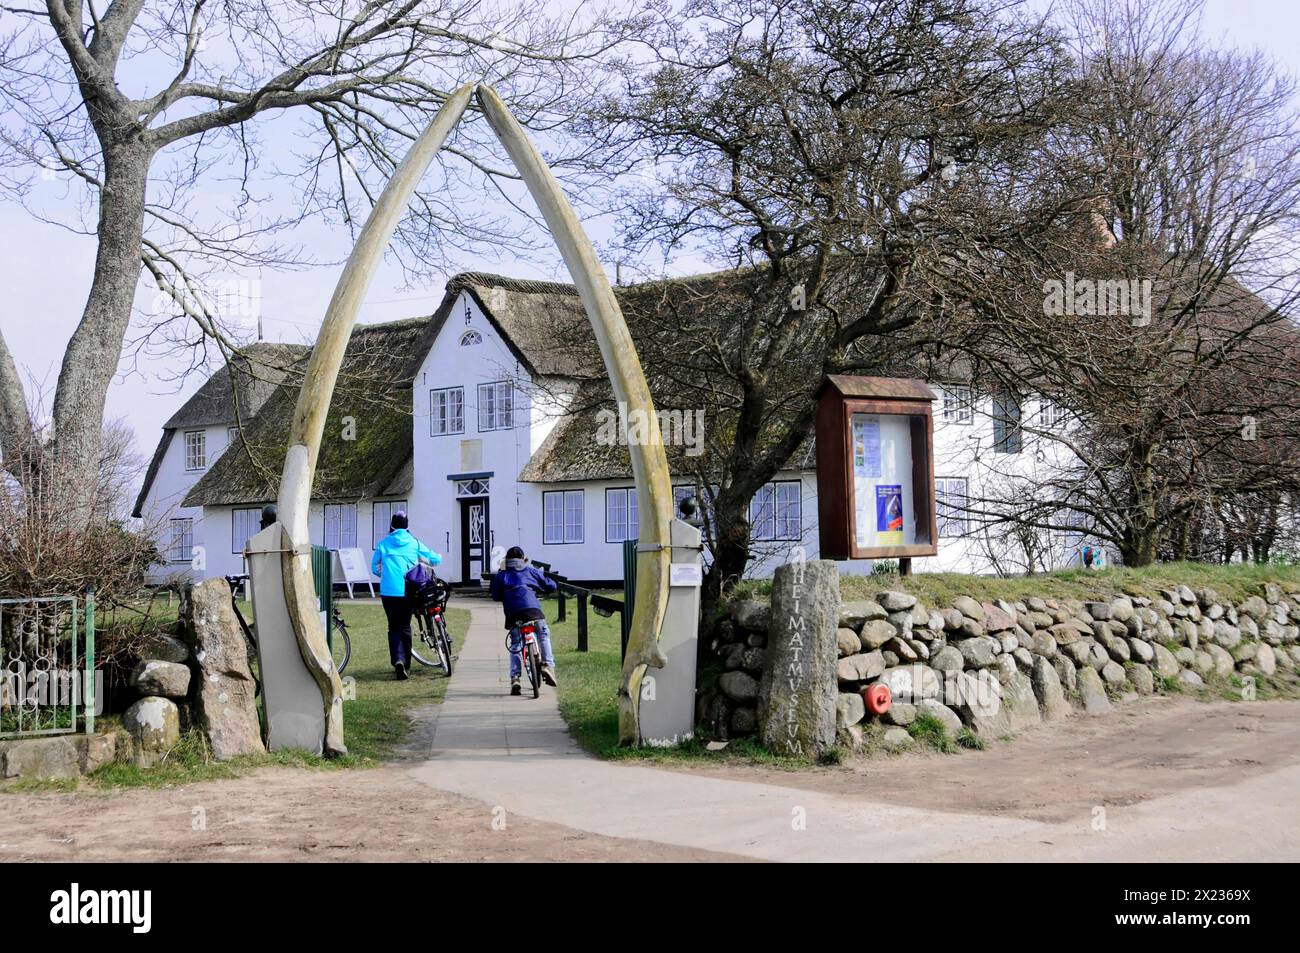 Sylt, North Frisian Island, Schleswig Holstein, Cyclists ride through an archway on a pebble path past historic houses, Sylt, North Frisian Island Stock Photo